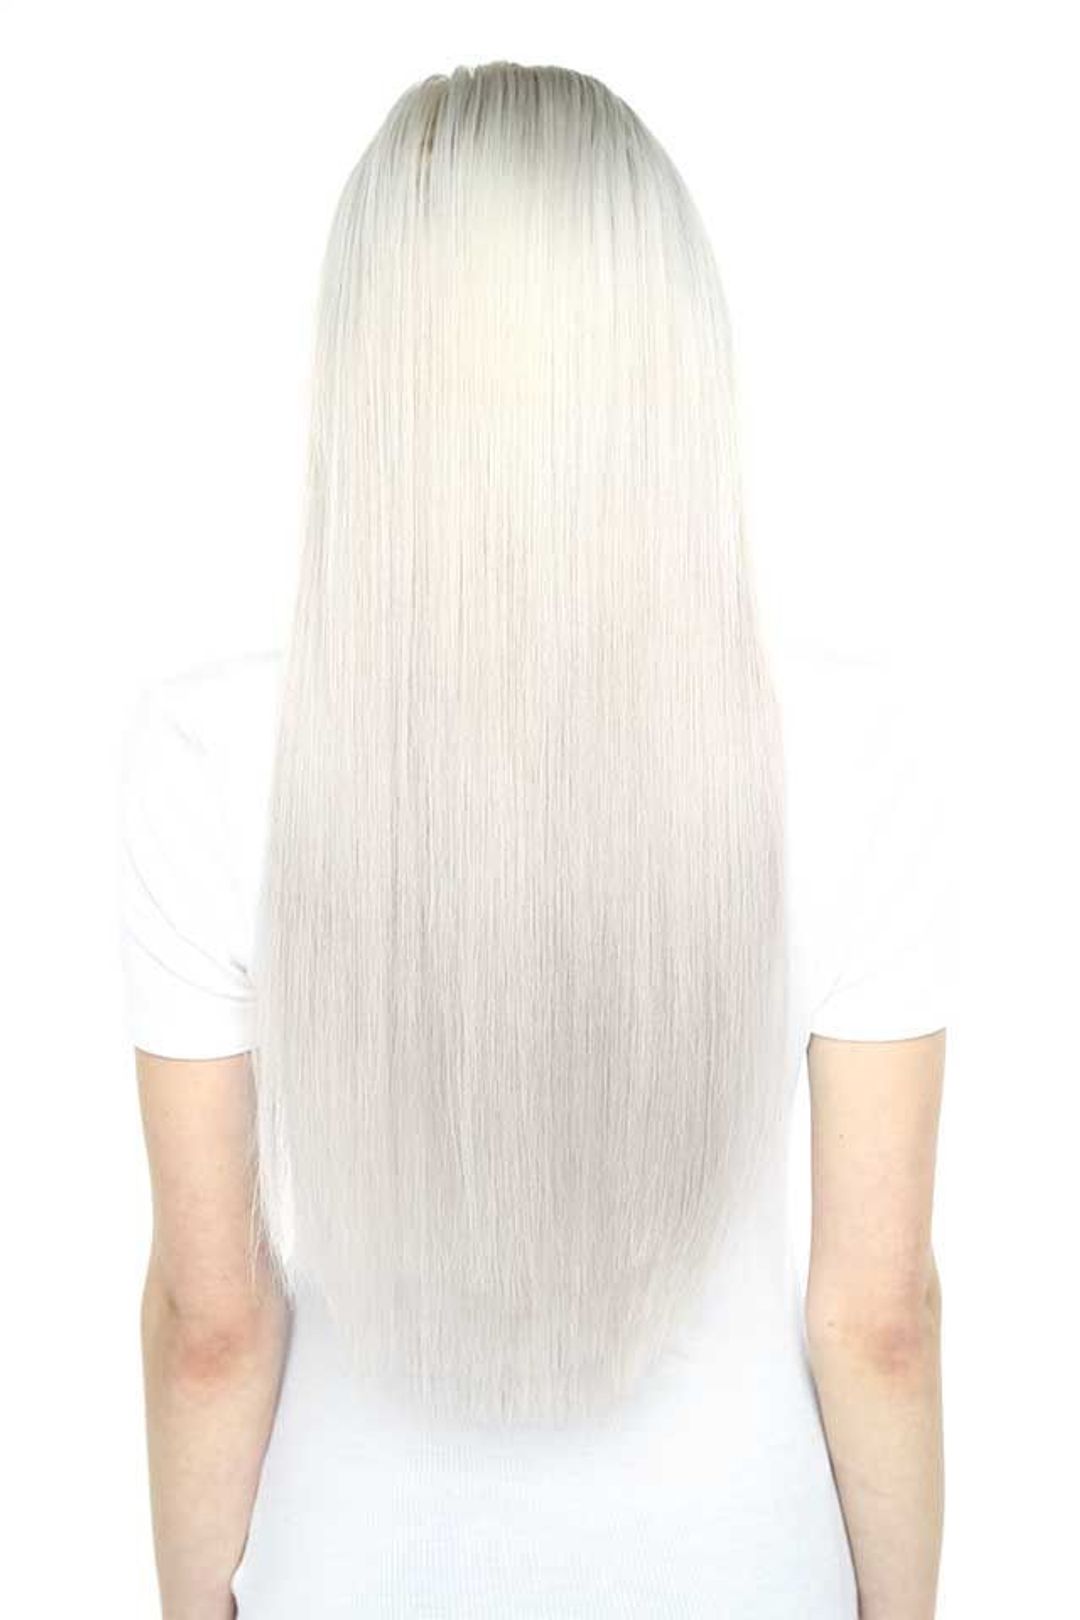 Beauty Works Celebrity Choice Weft Hair Extensions - Barley Blonde,22"